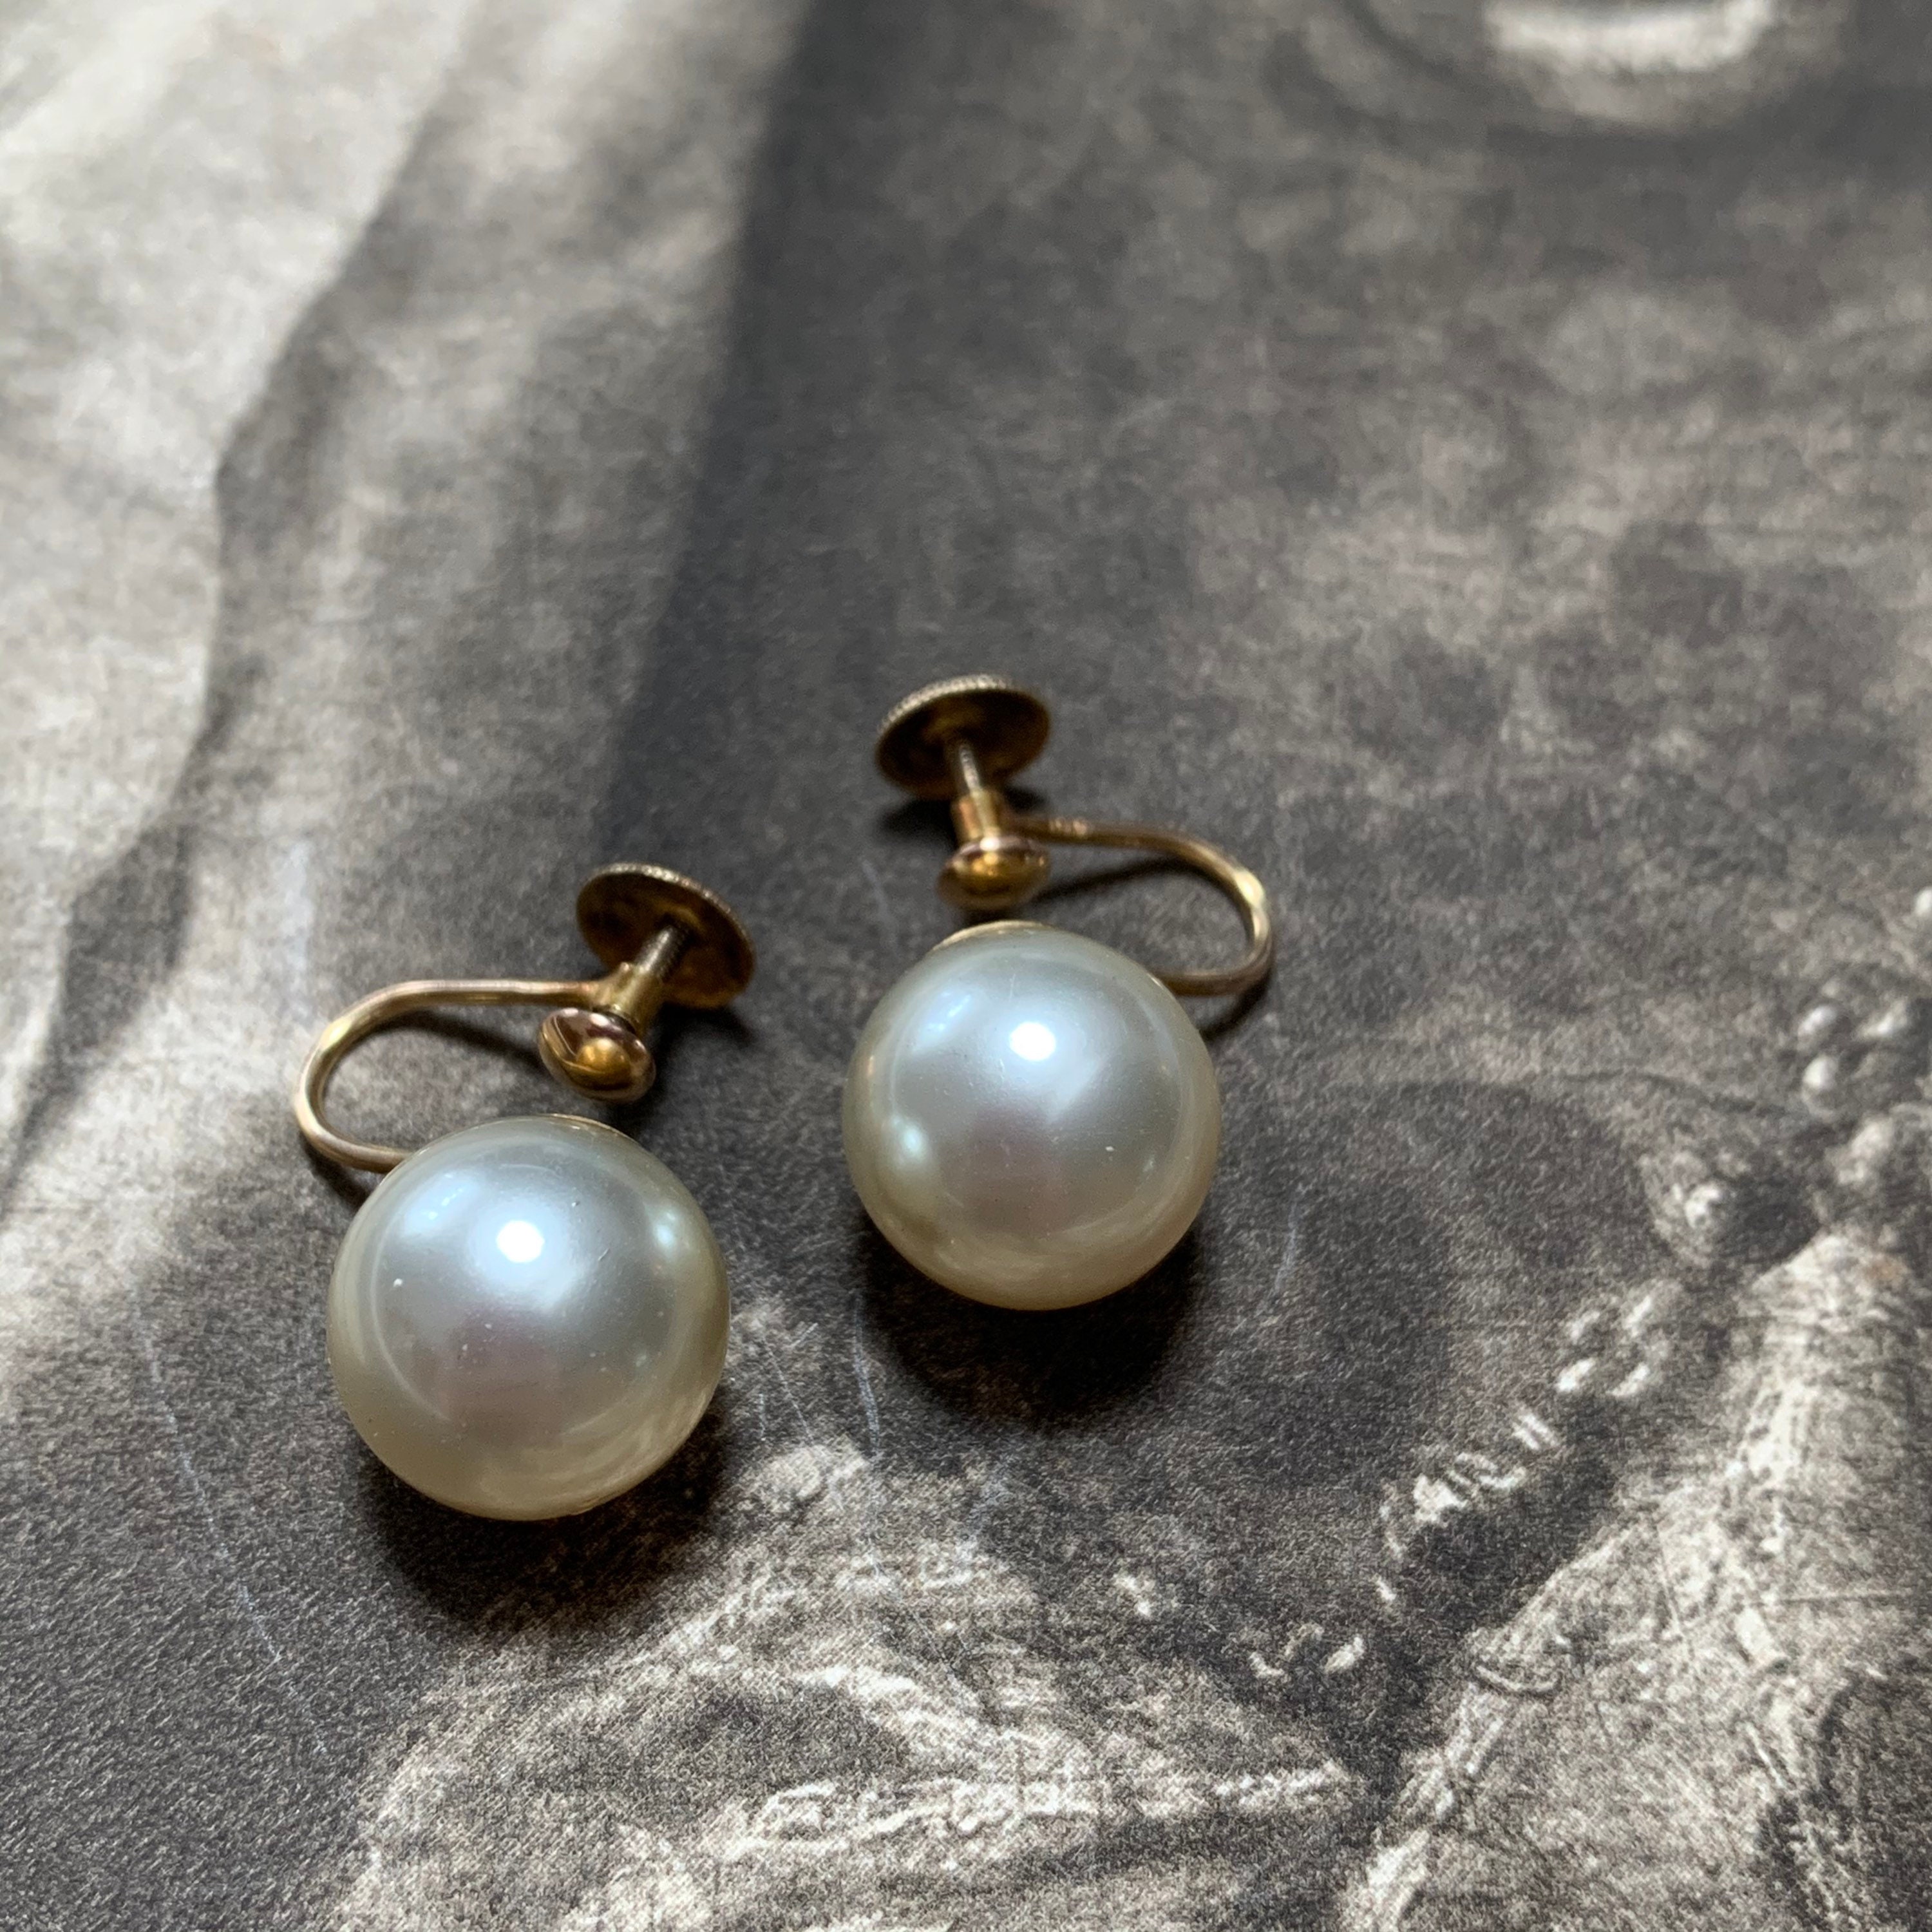 Vintage 9Ct Large Pearl Screwback Earrings, These Are High Quality Simulated 11mm Pearls Set To A Heavy Gold Screw Back Fitting